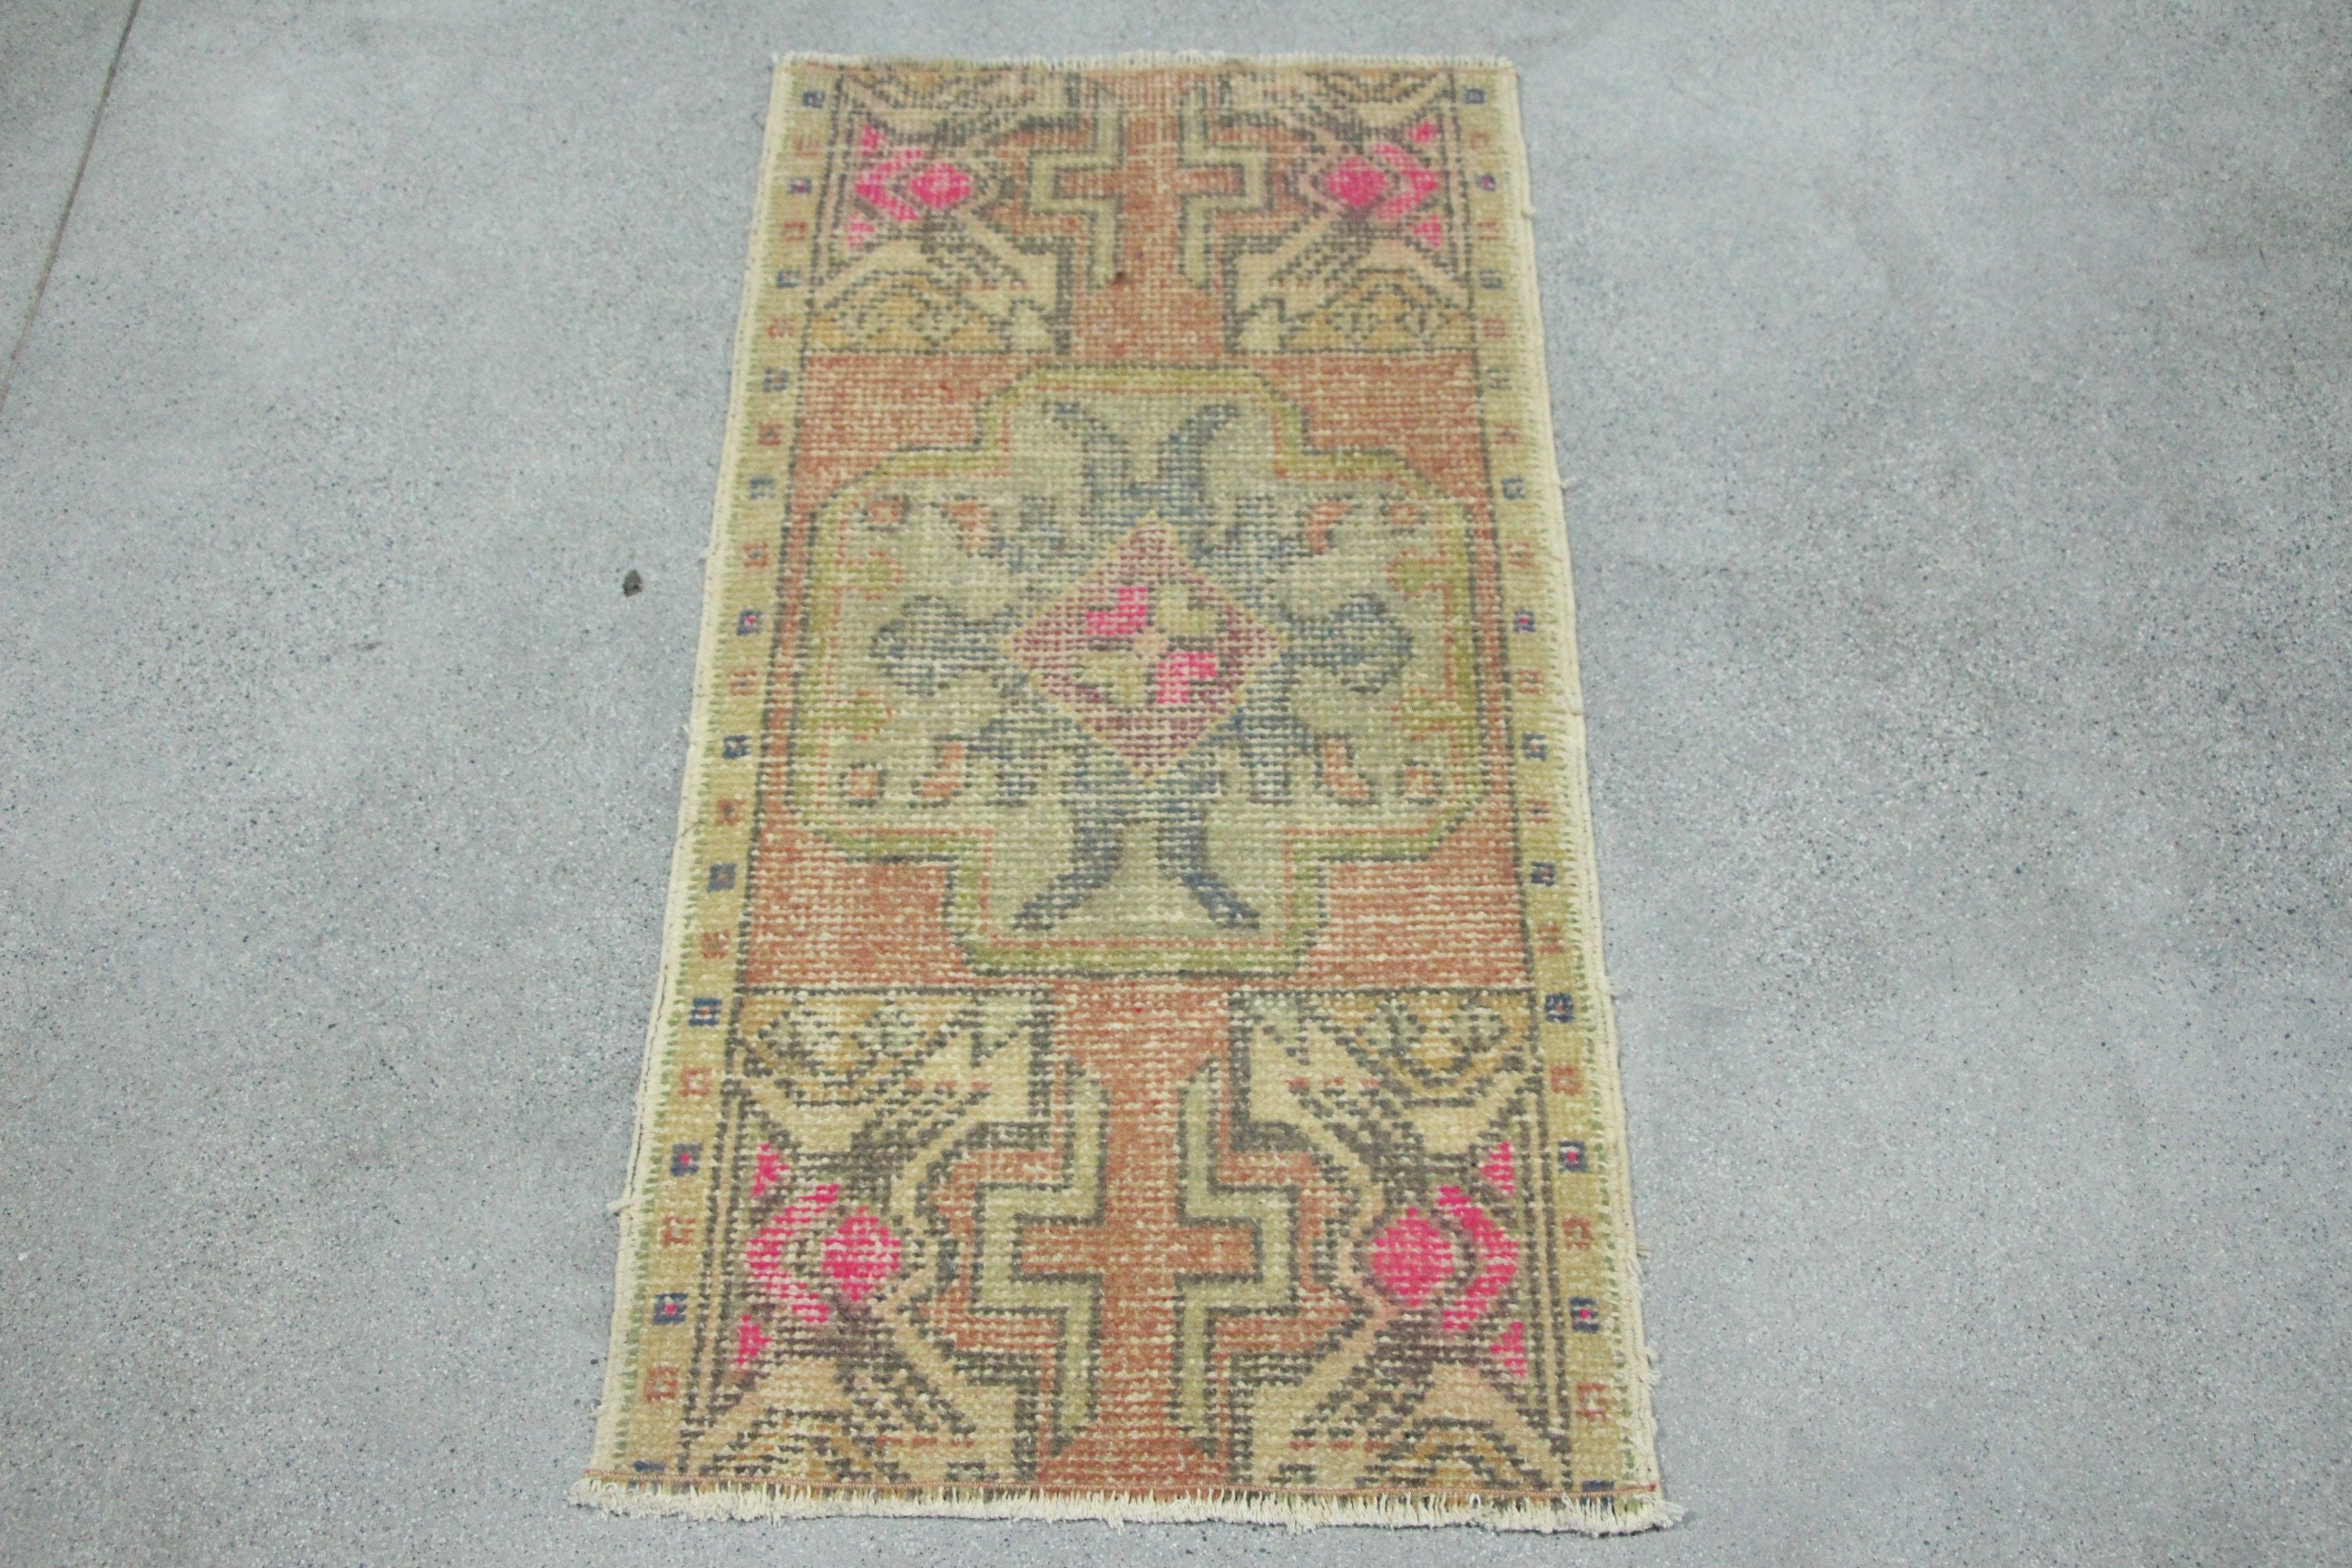 1.7x3.2 ft Small Rug, Cool Rug, Entry Rugs, Orange Antique Rugs, Vintage Rug, Turkish Rug, Wall Hanging Rug, Hand Woven Rugs, Moroccan Rug